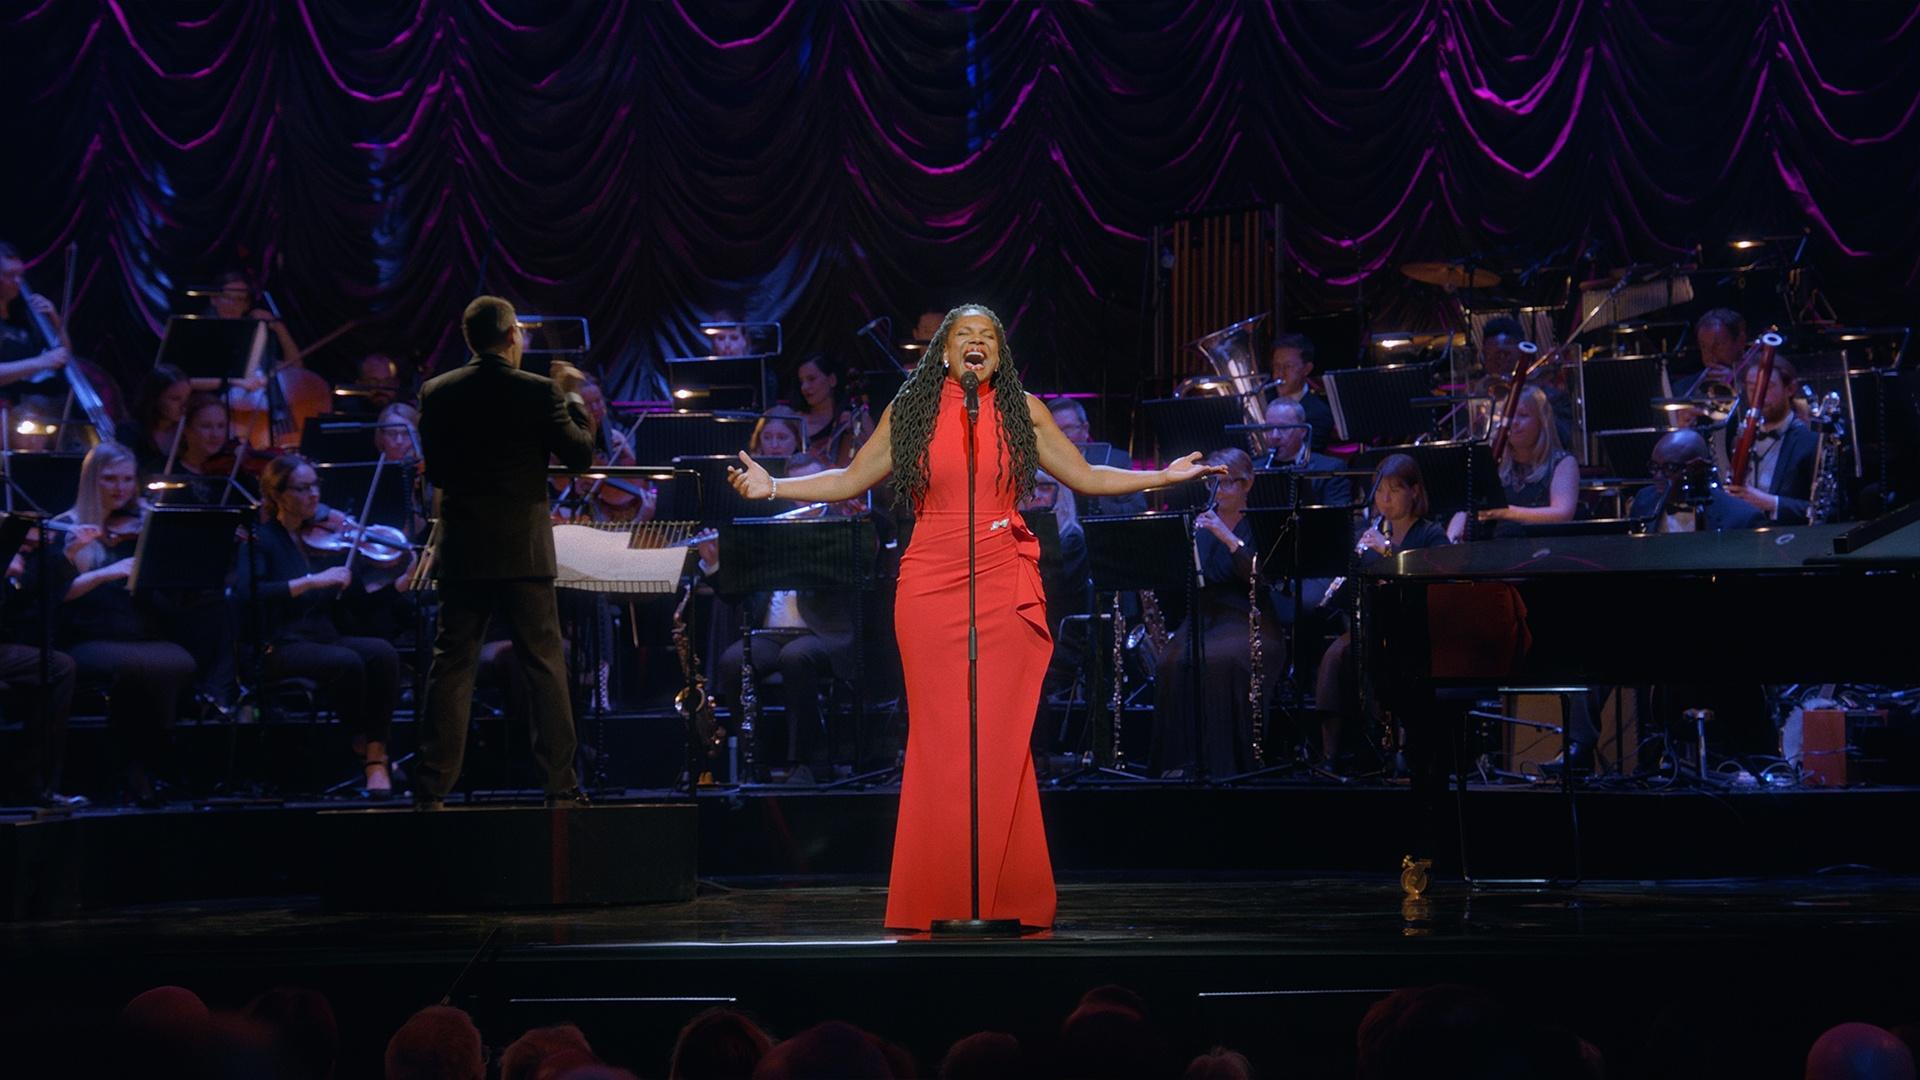 Audra McDonald, wearing a red dress, and singing on stage in front of an orchestra